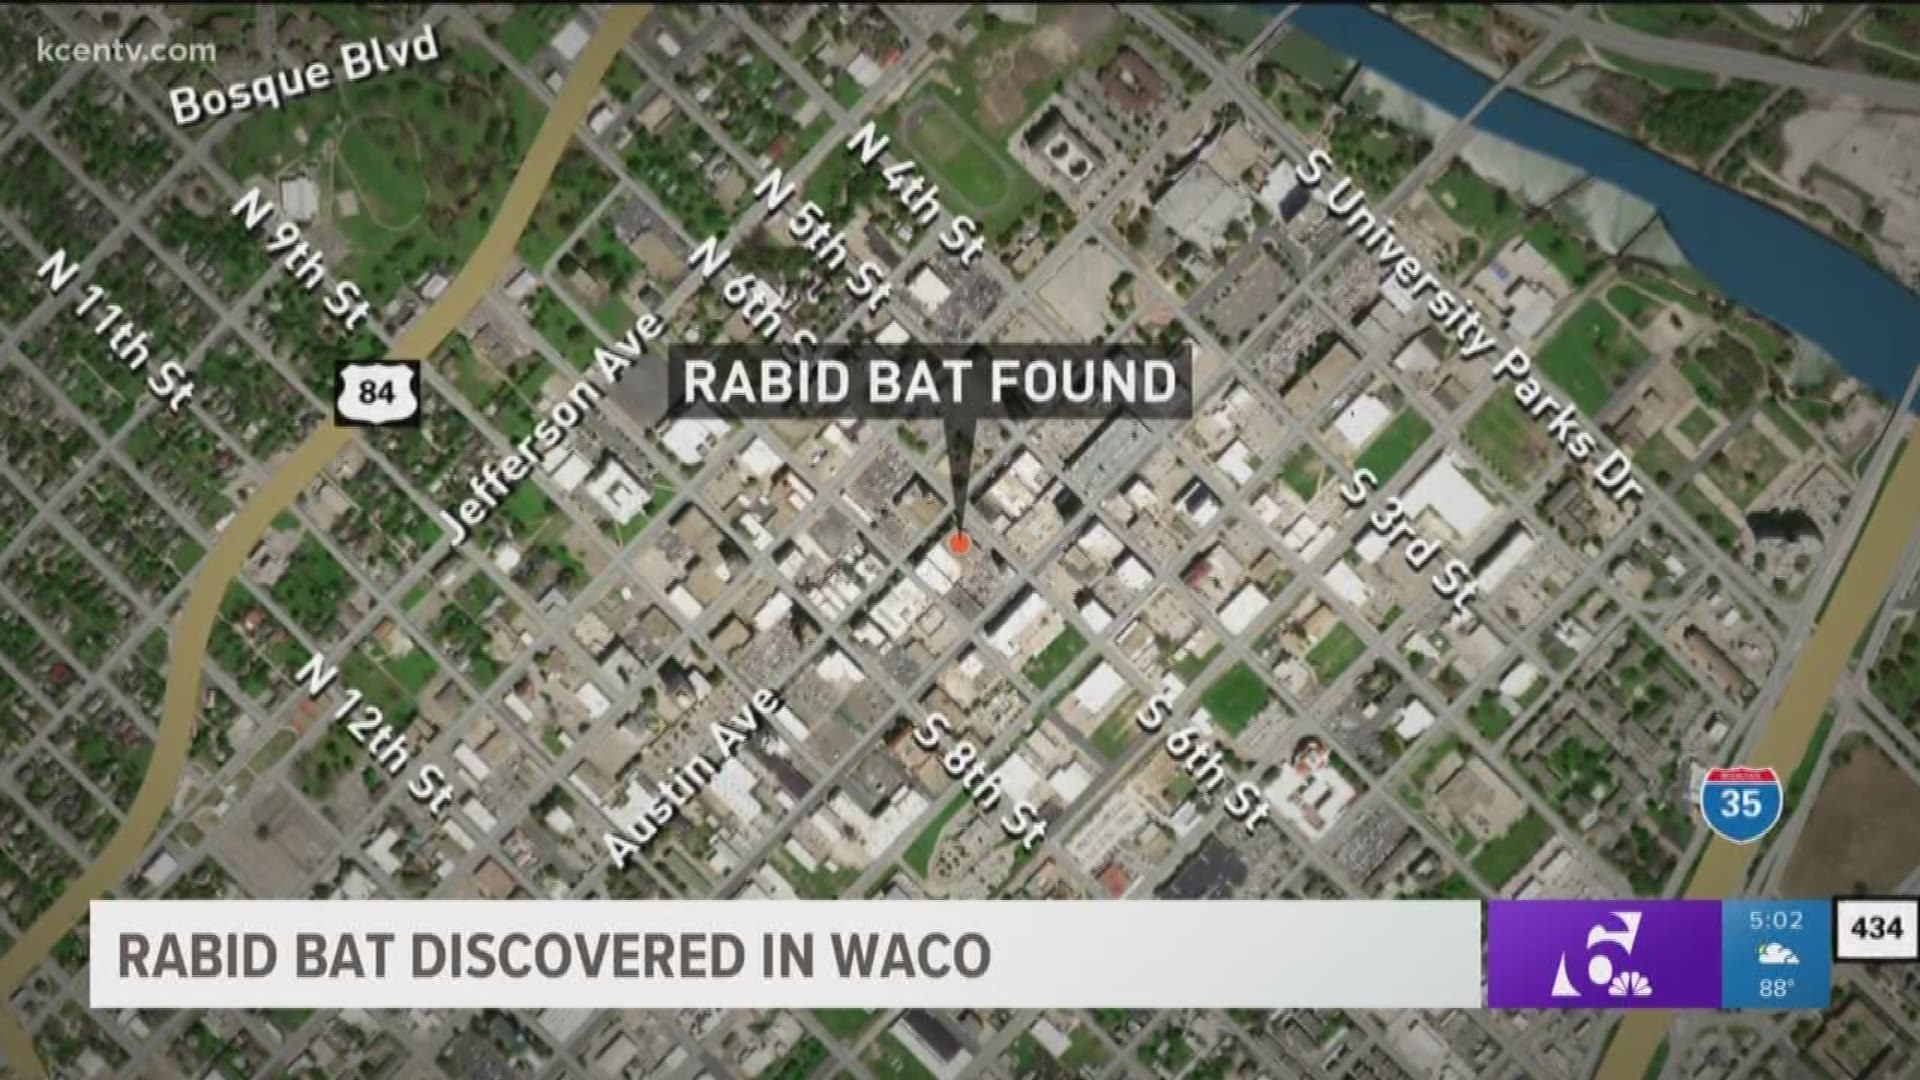 A bat that tested positive for rabies was found in the 600 block of Austin Ave. in Waco.